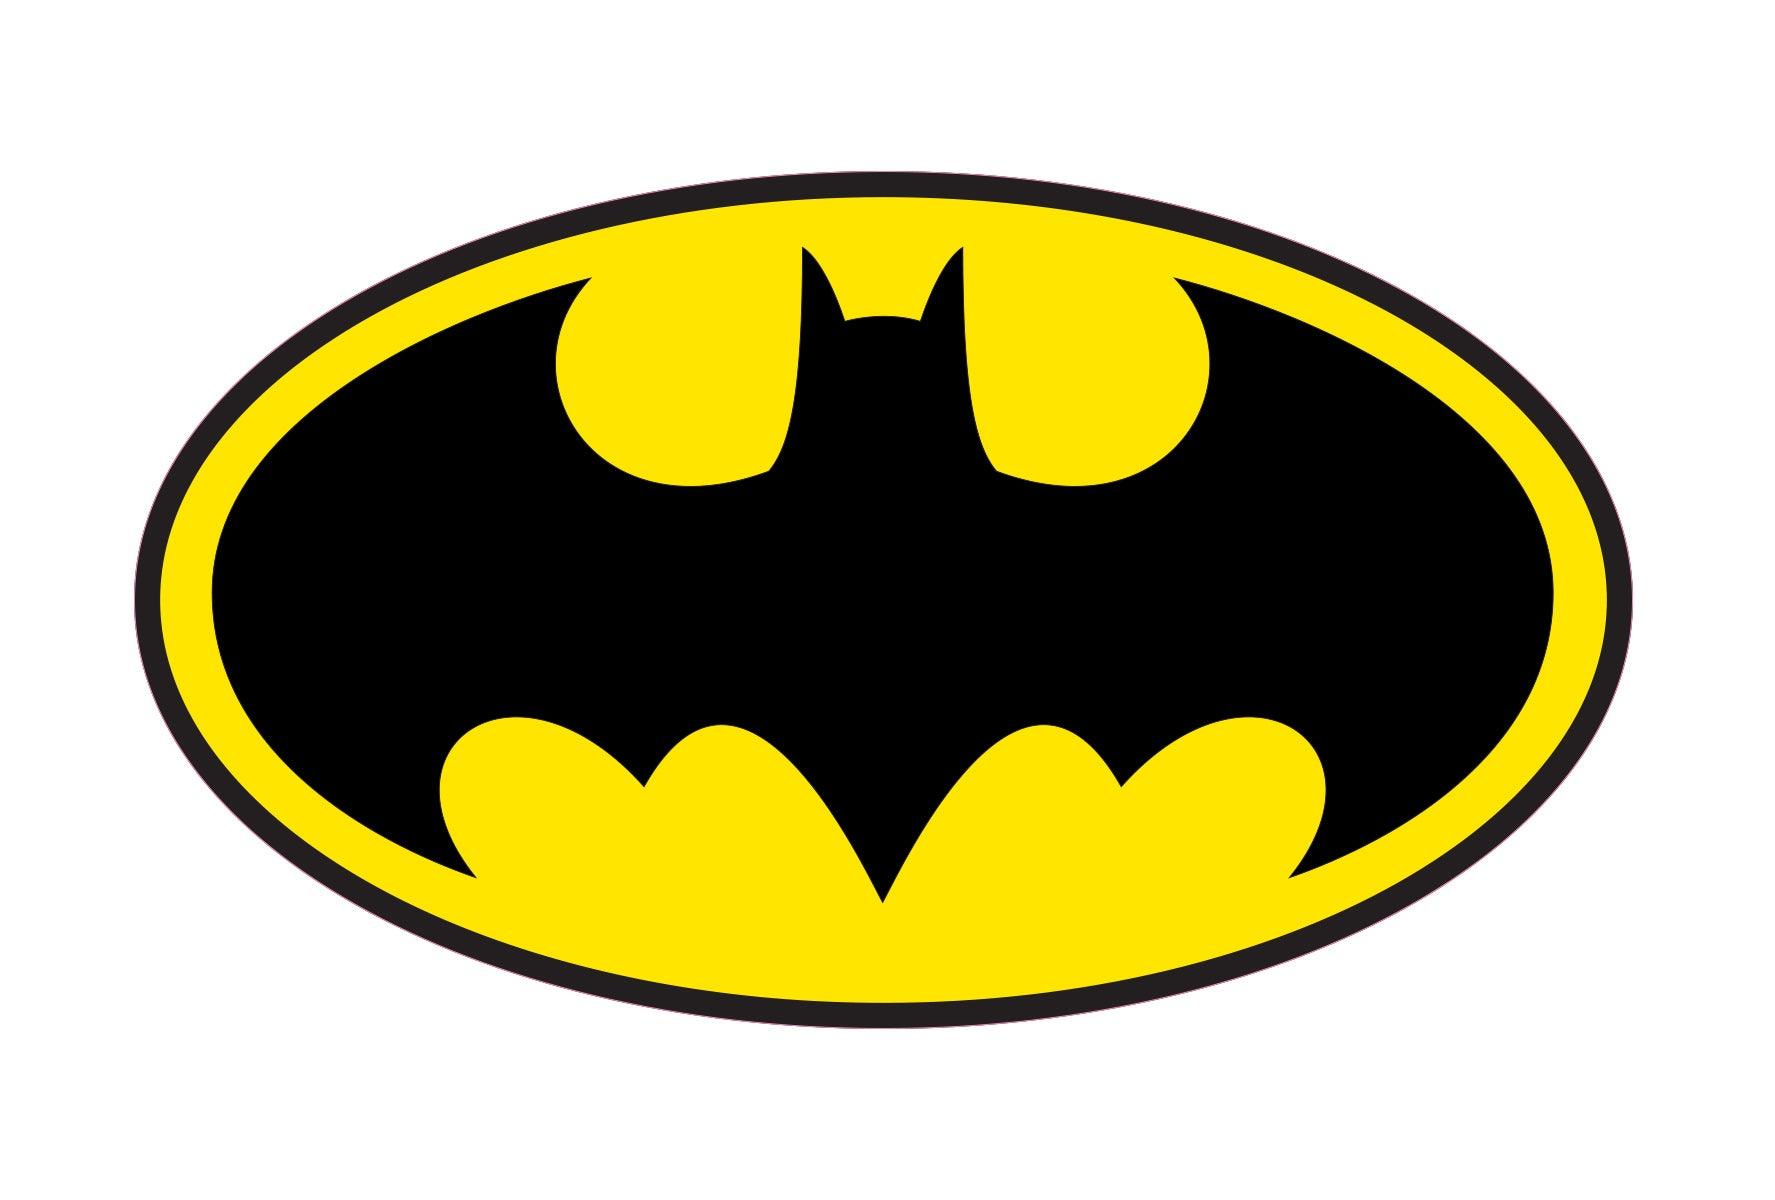 CoolWalls.ca Cars Yellow Round Batman, Wall Decal Sticker, Easy to Peel-N-Stick